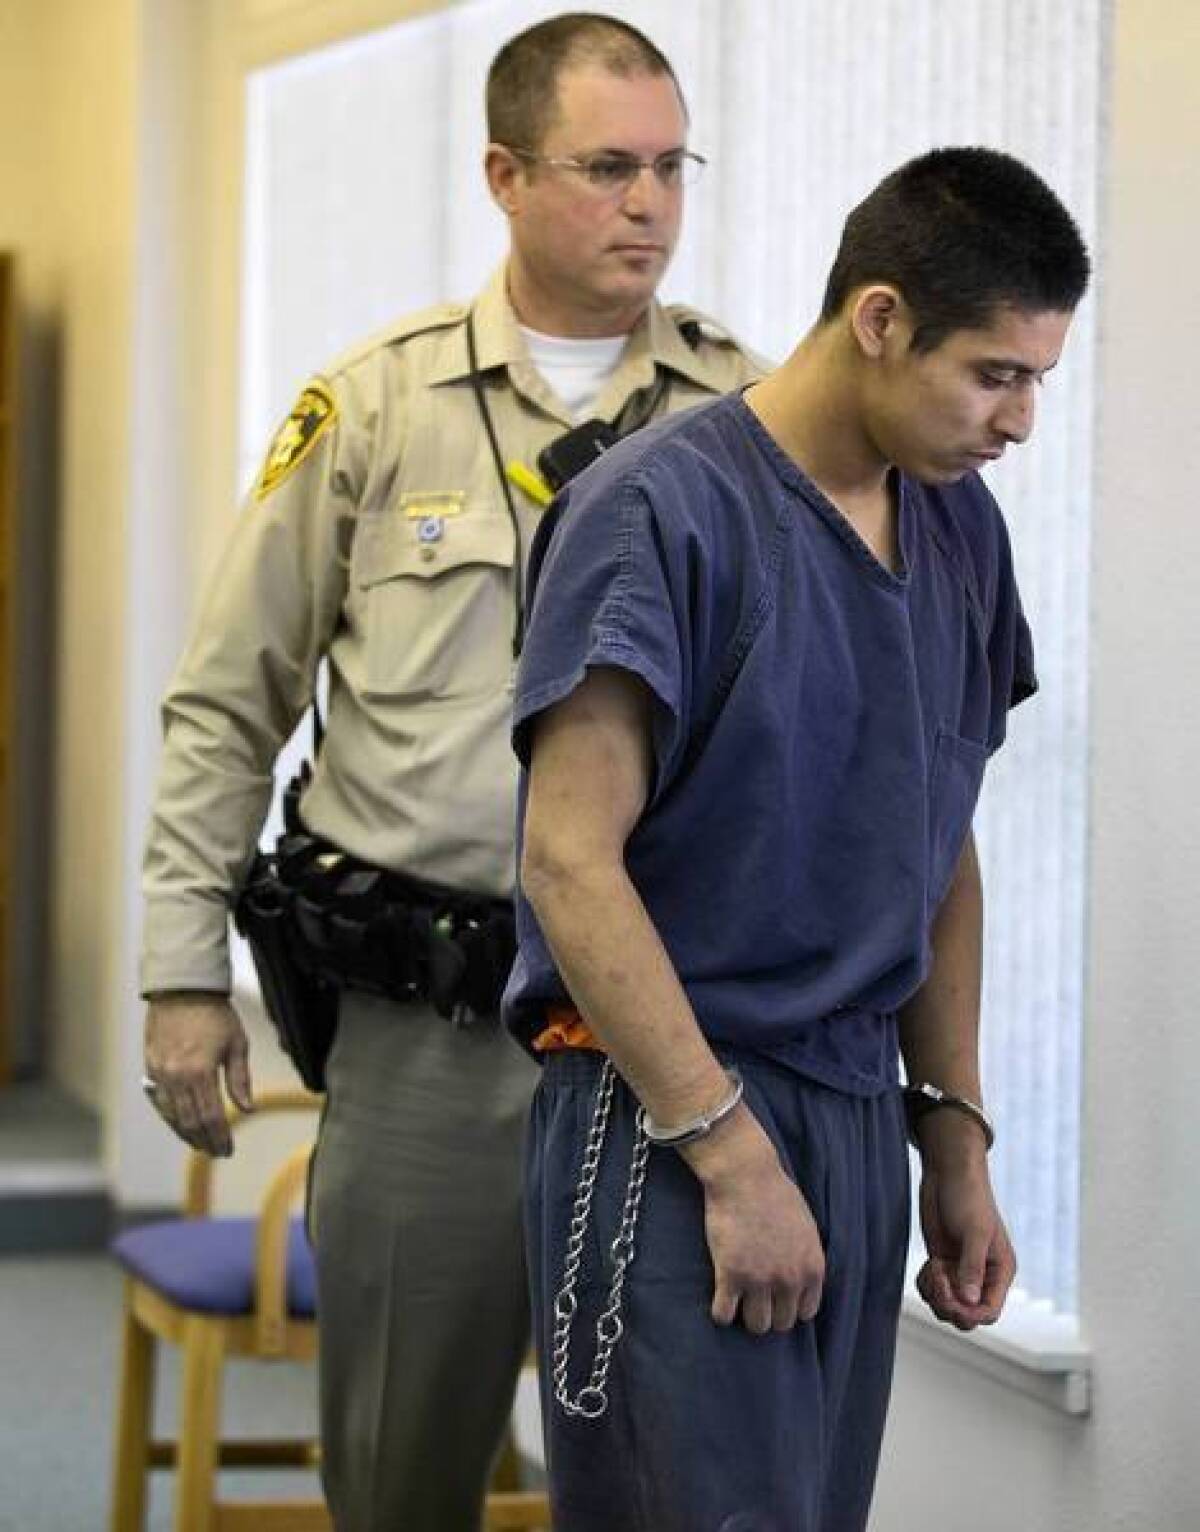 Jean Soriano, 18, right, had been charged with multiple counts of felony drunk driving, but prosecutors dropped the charges after learning he was not the driver of an SUV that rear-ended a van on Interstate 15 about 80 miles northeast of Las Vegas and killed five people in March.